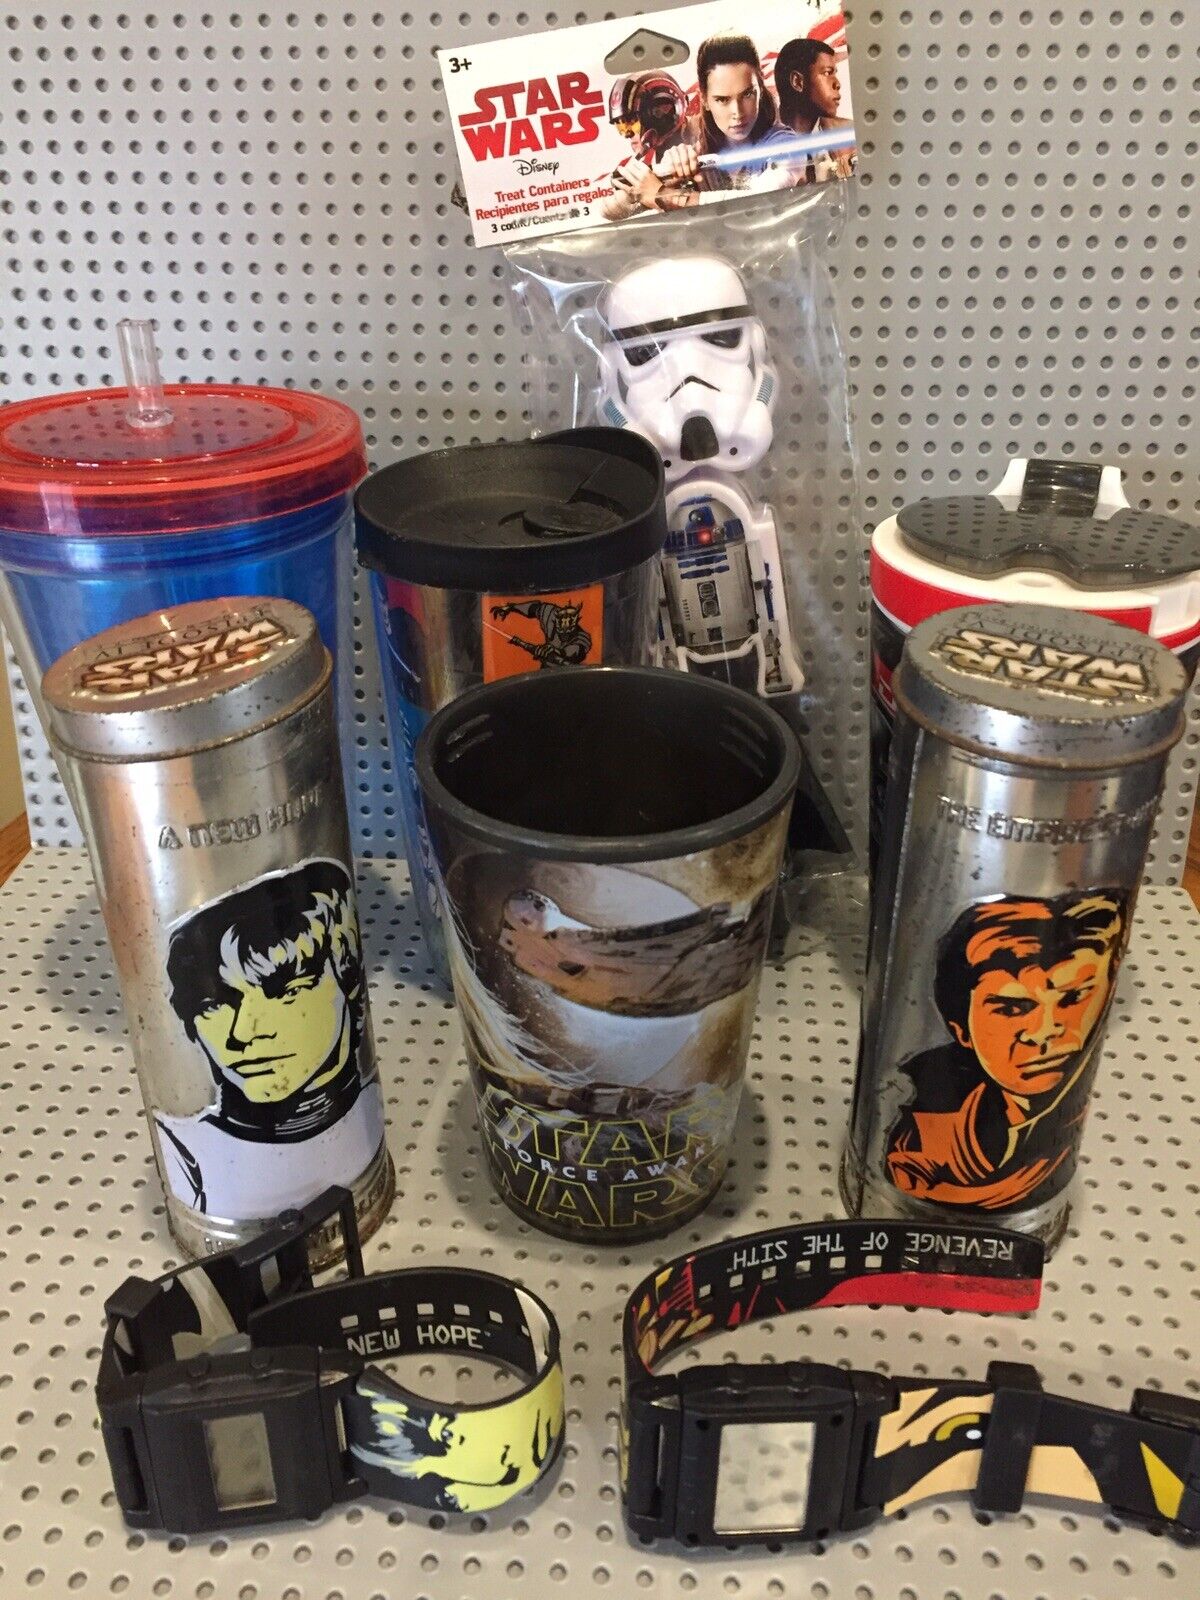 Stat Wars Mixed Collectible Lot~Cups~BK Watches~Treat Containers~Force Awakens